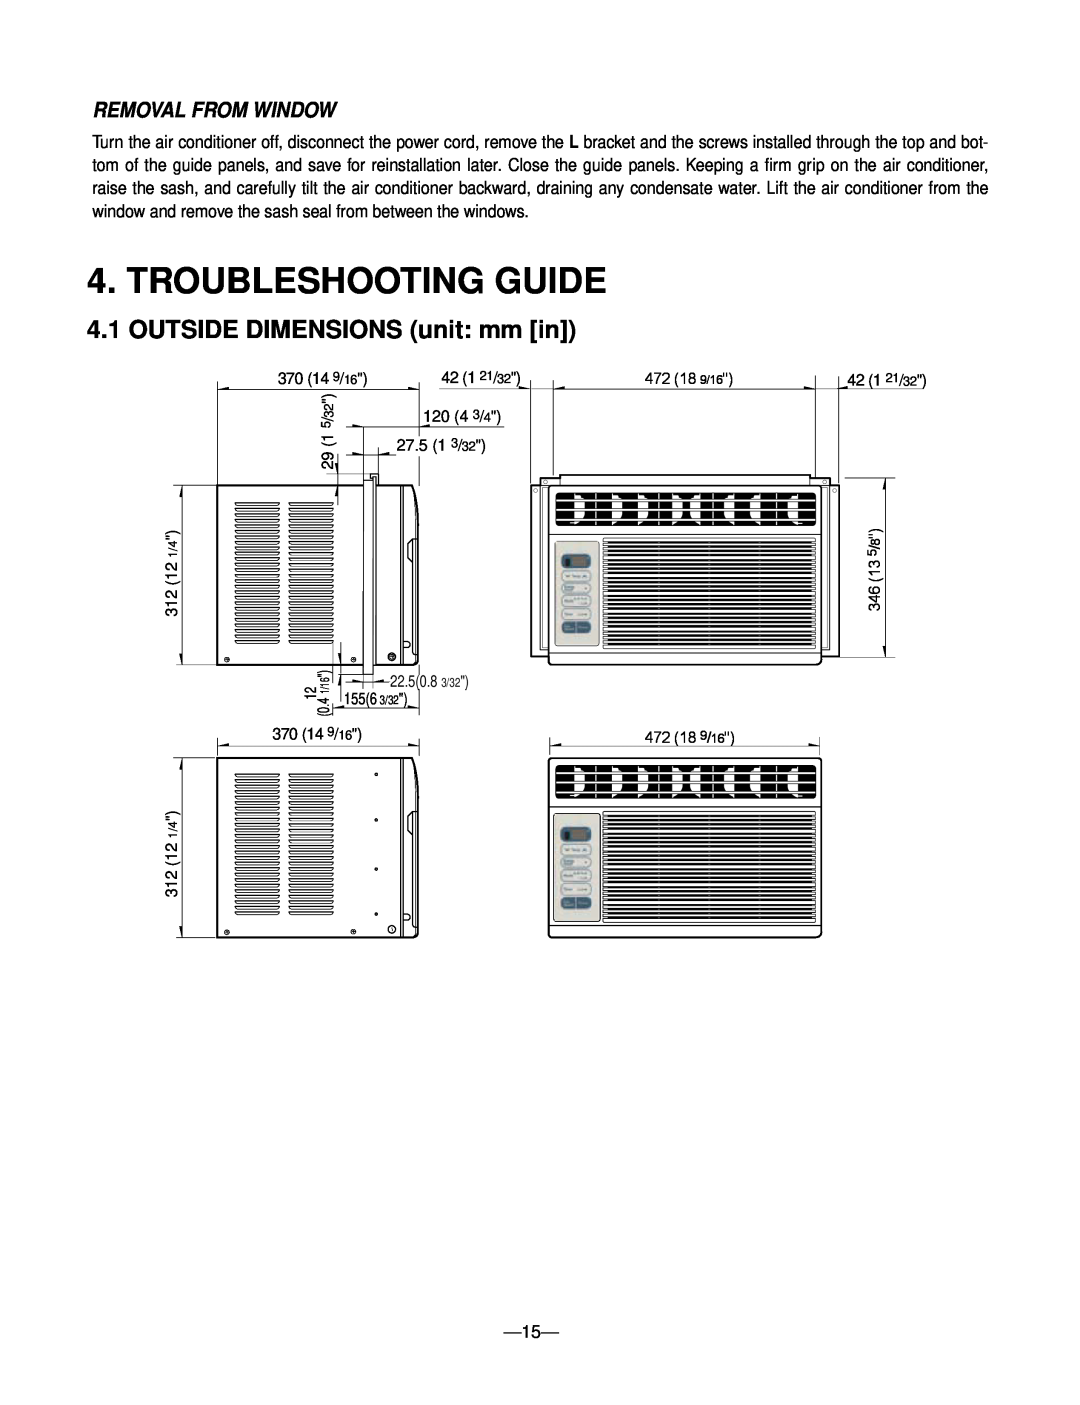 Heat Controller RADS-51B manual Troubleshooting Guide, OUTSIDE DIMENSIONS unit mm in, Removal From Window 